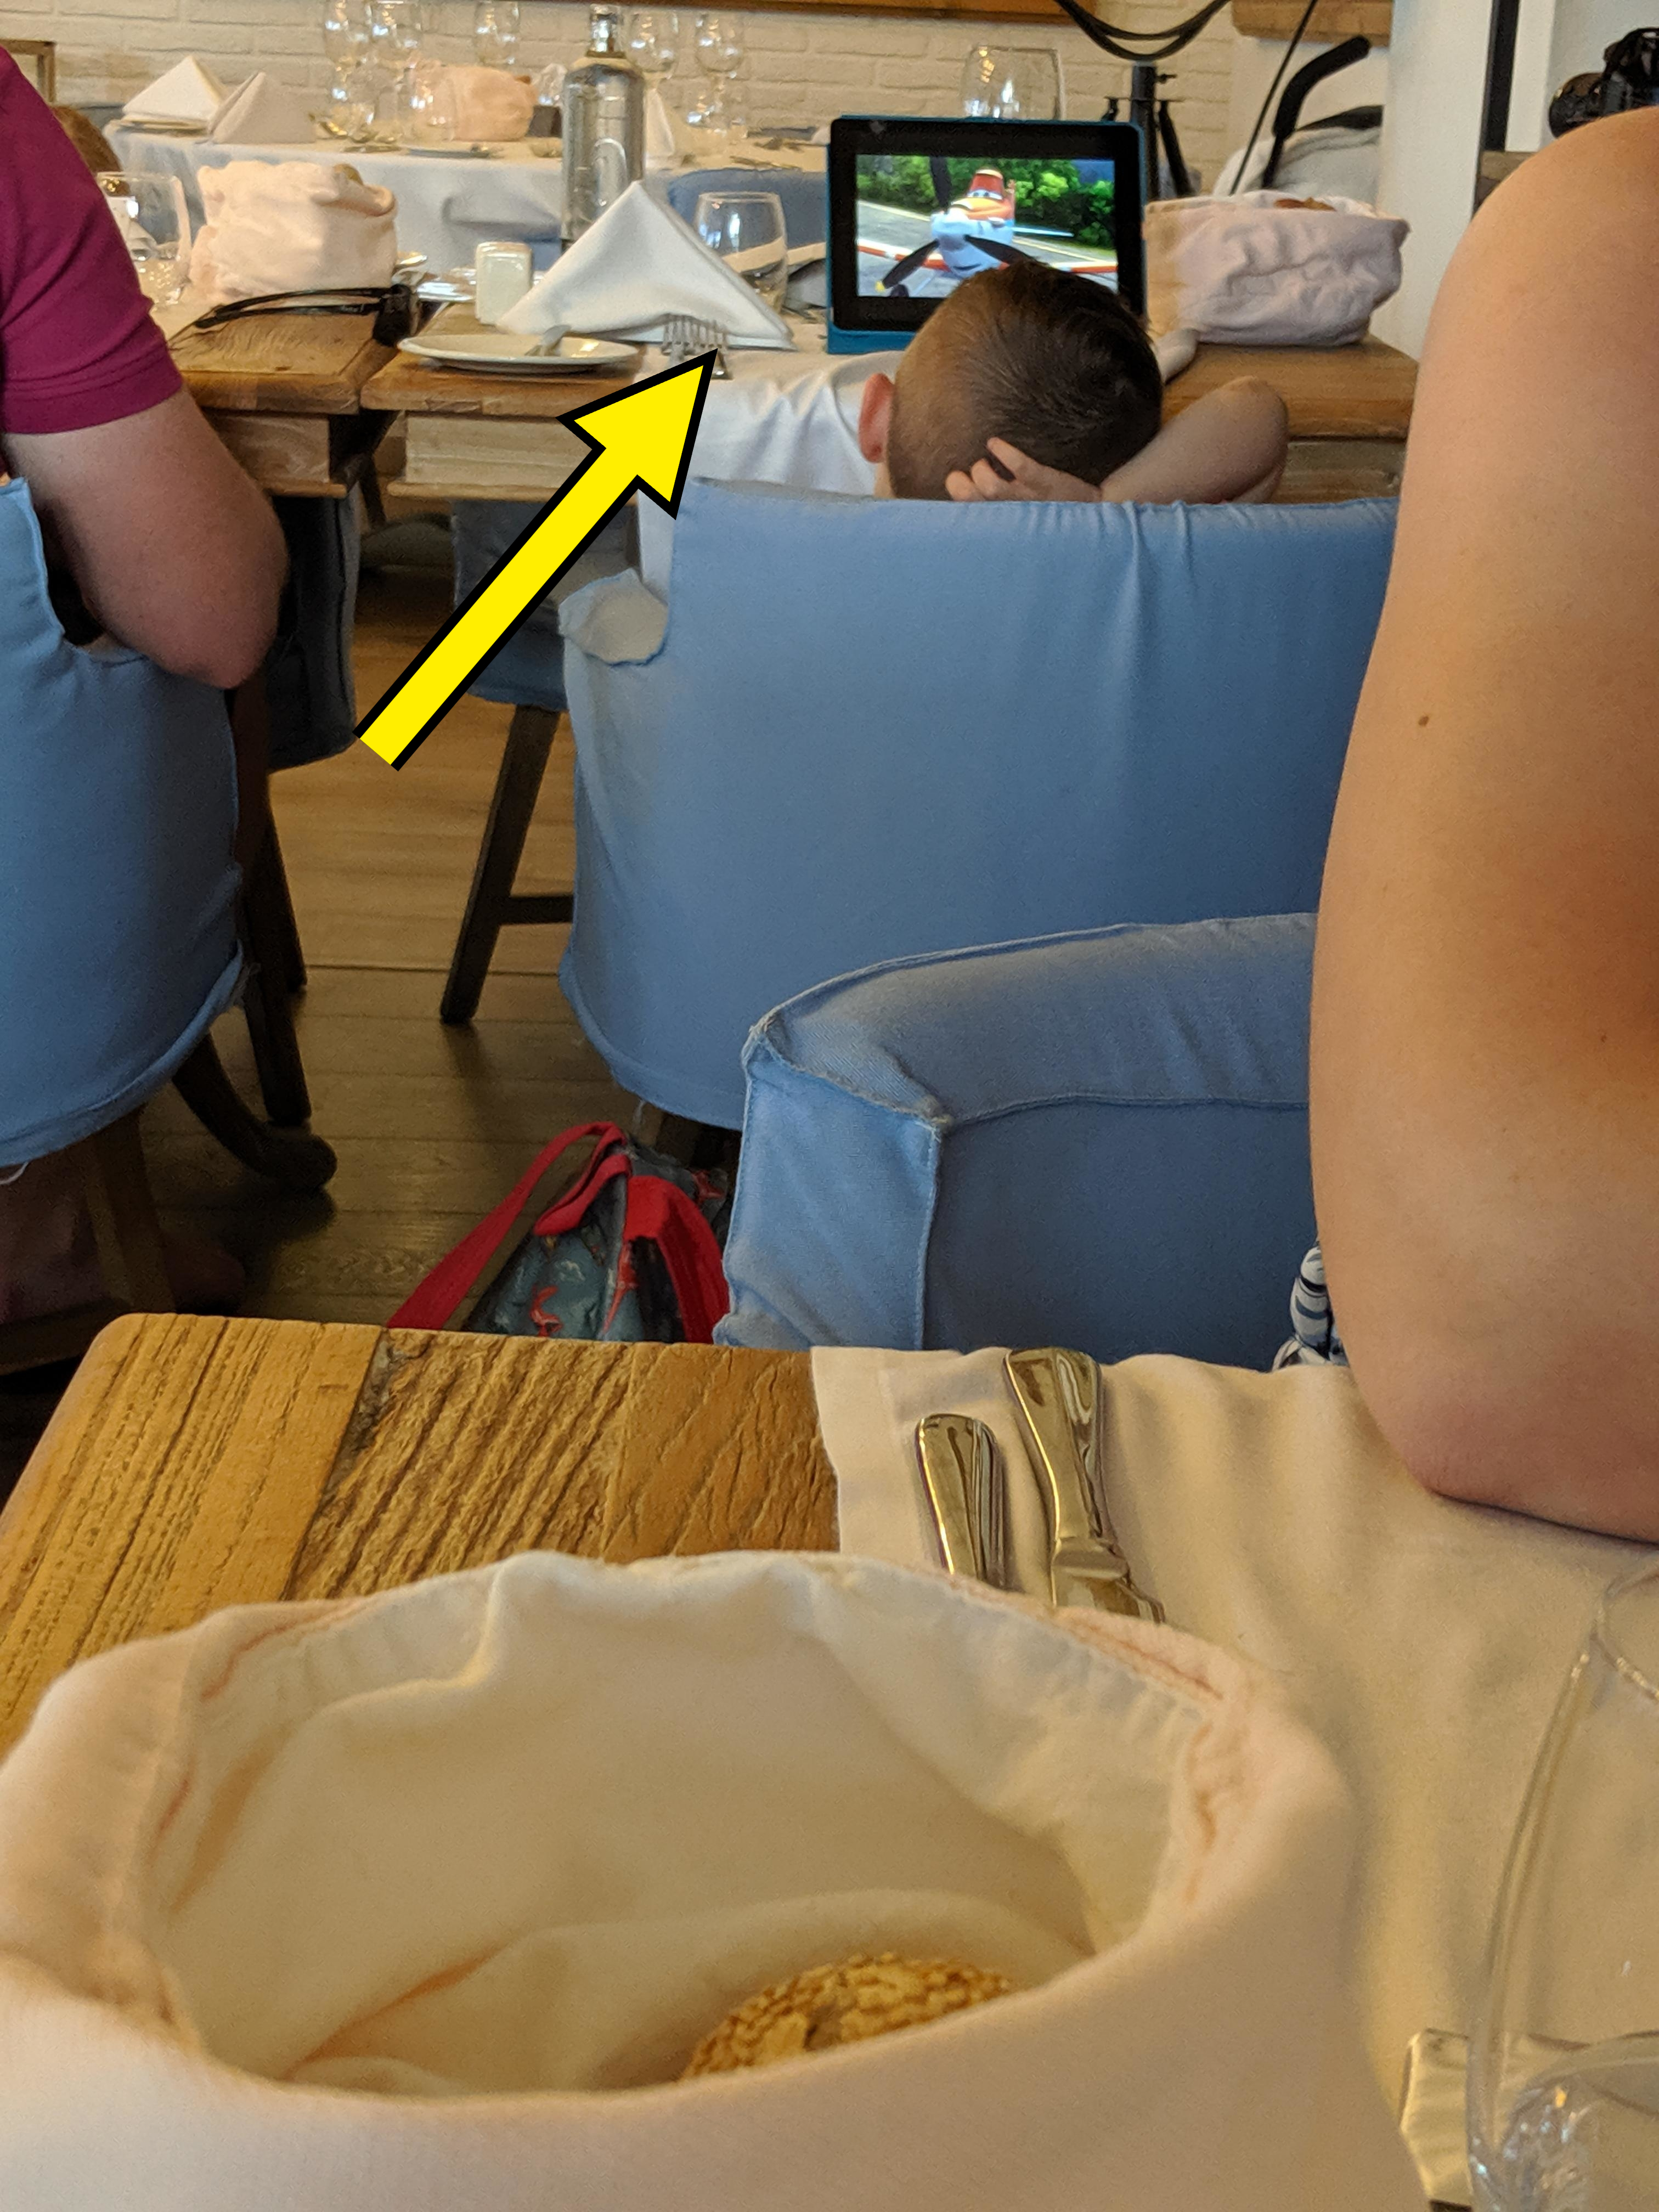 Child resting head on table in a restaurant with an iPad playing a movie out loud